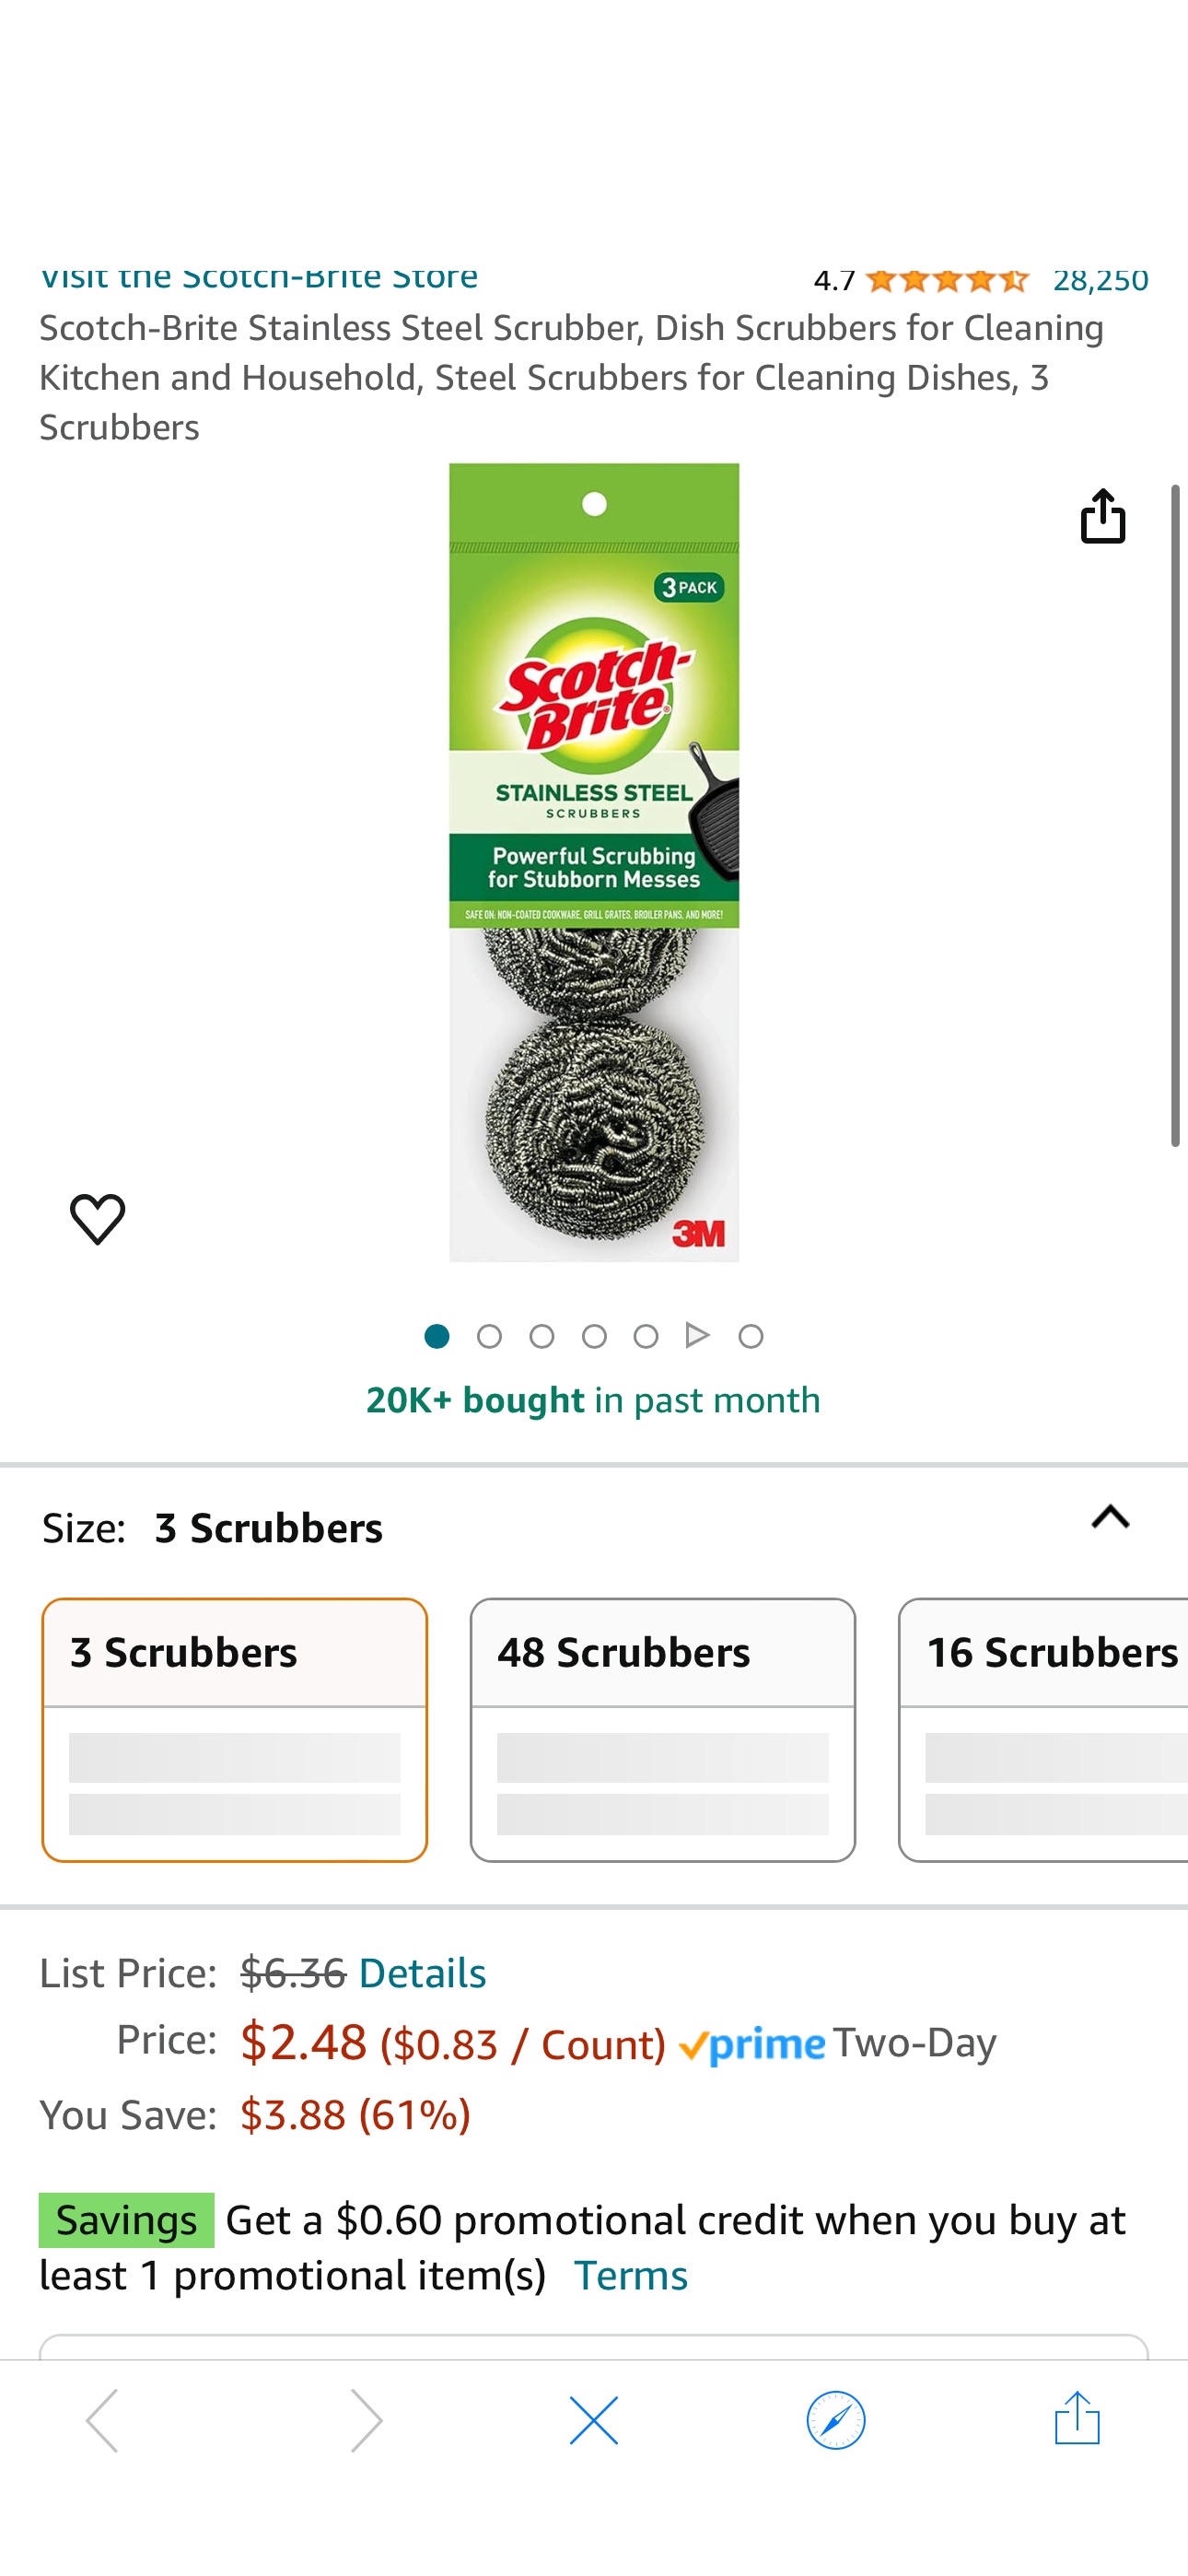 Amazon.com: Scotch-Brite Stainless Steel Scrubber, Dish Scrubbers for Cleaning Kitchen and Household, Steel Scrubbers for Cleaning Dishes, 3 Scrubbers : Health & Household